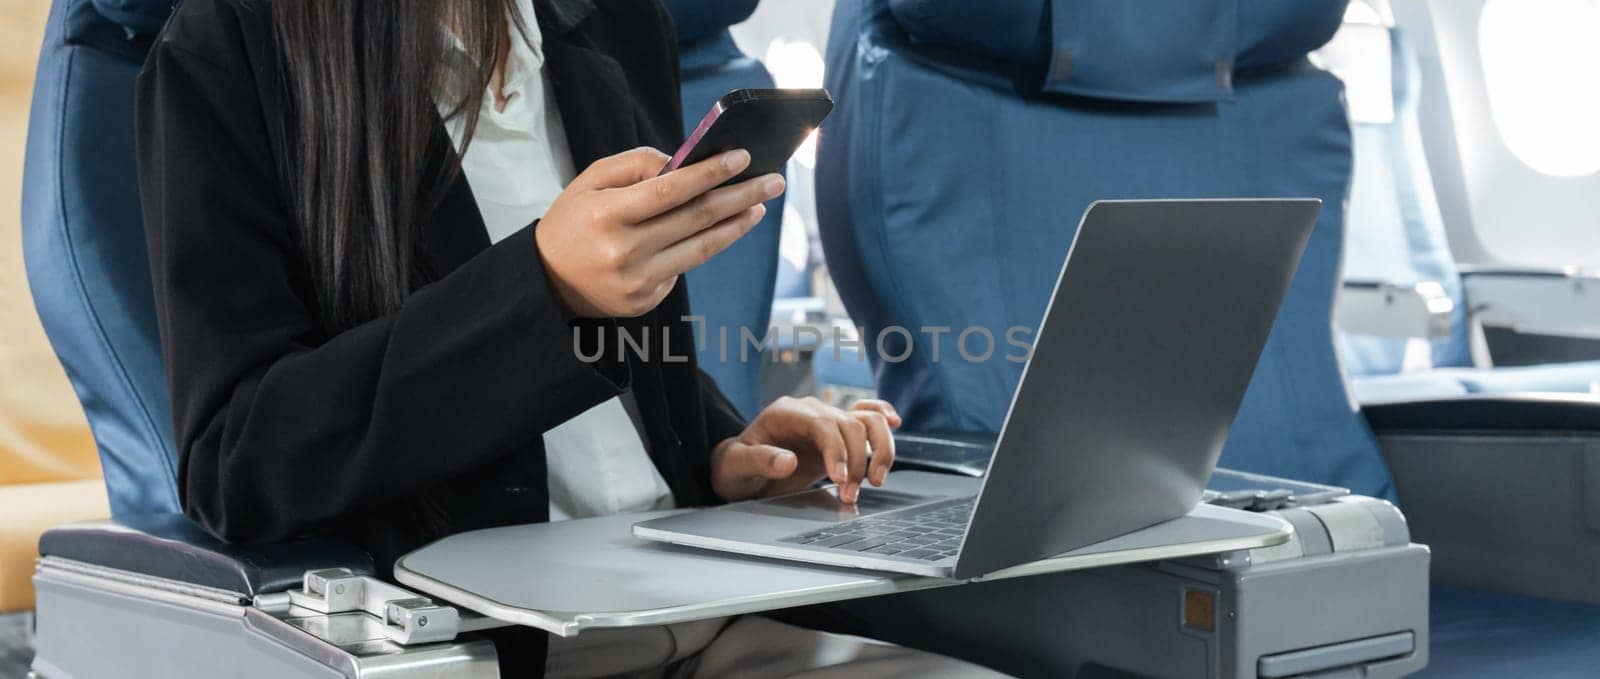 transport, tourism and technology concept - close up of business woman with smartphone and laptop traveling by plane by nateemee